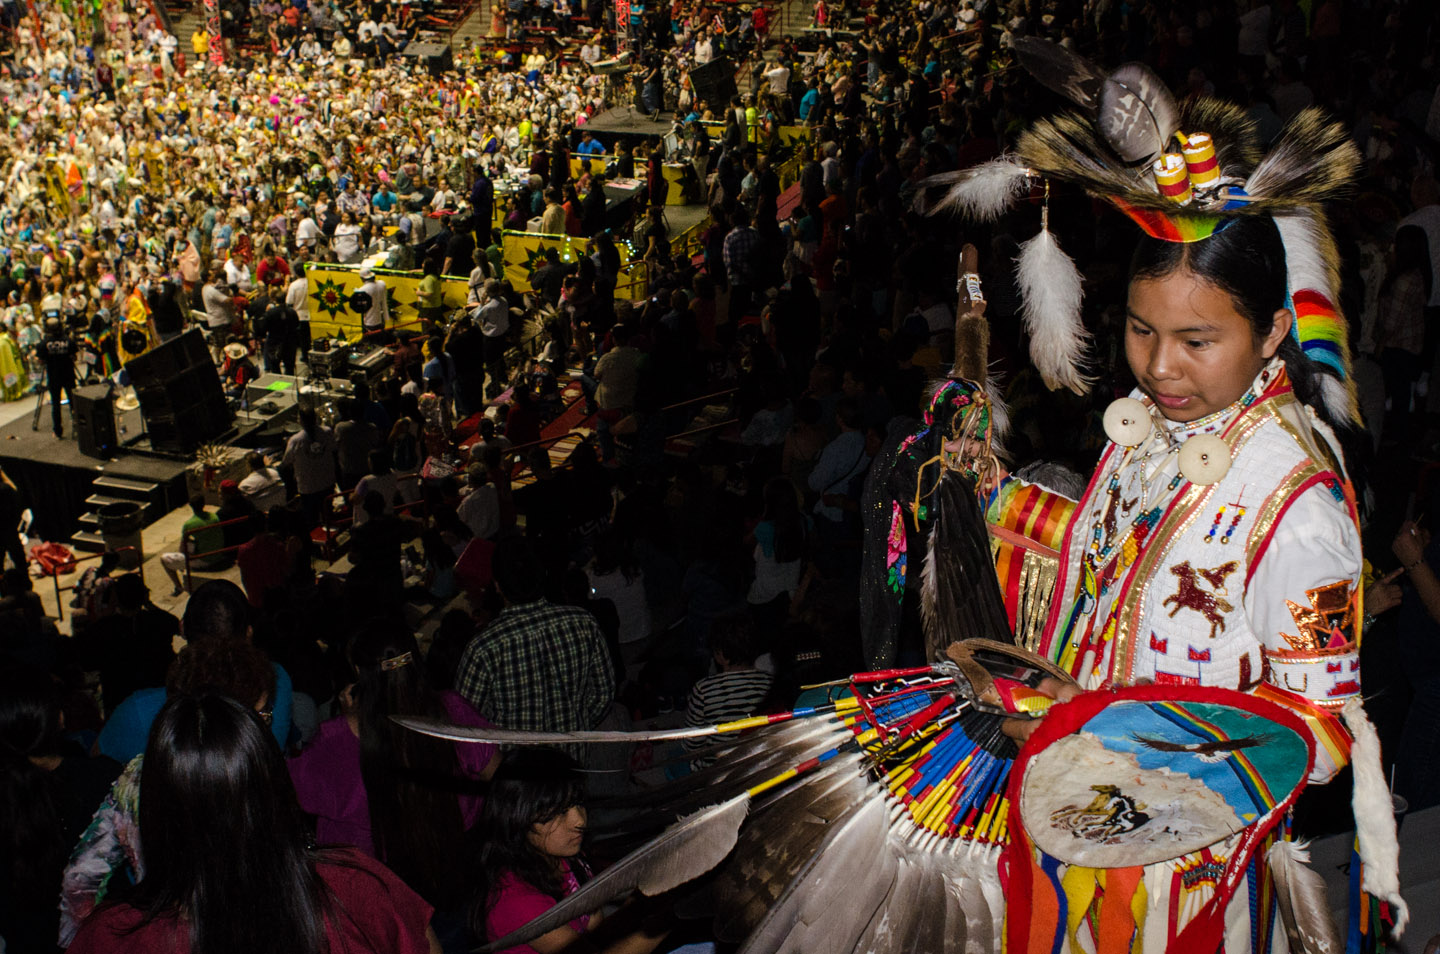 A young dancer gathers his regalia high above the grand entry taking place on the arena floor.